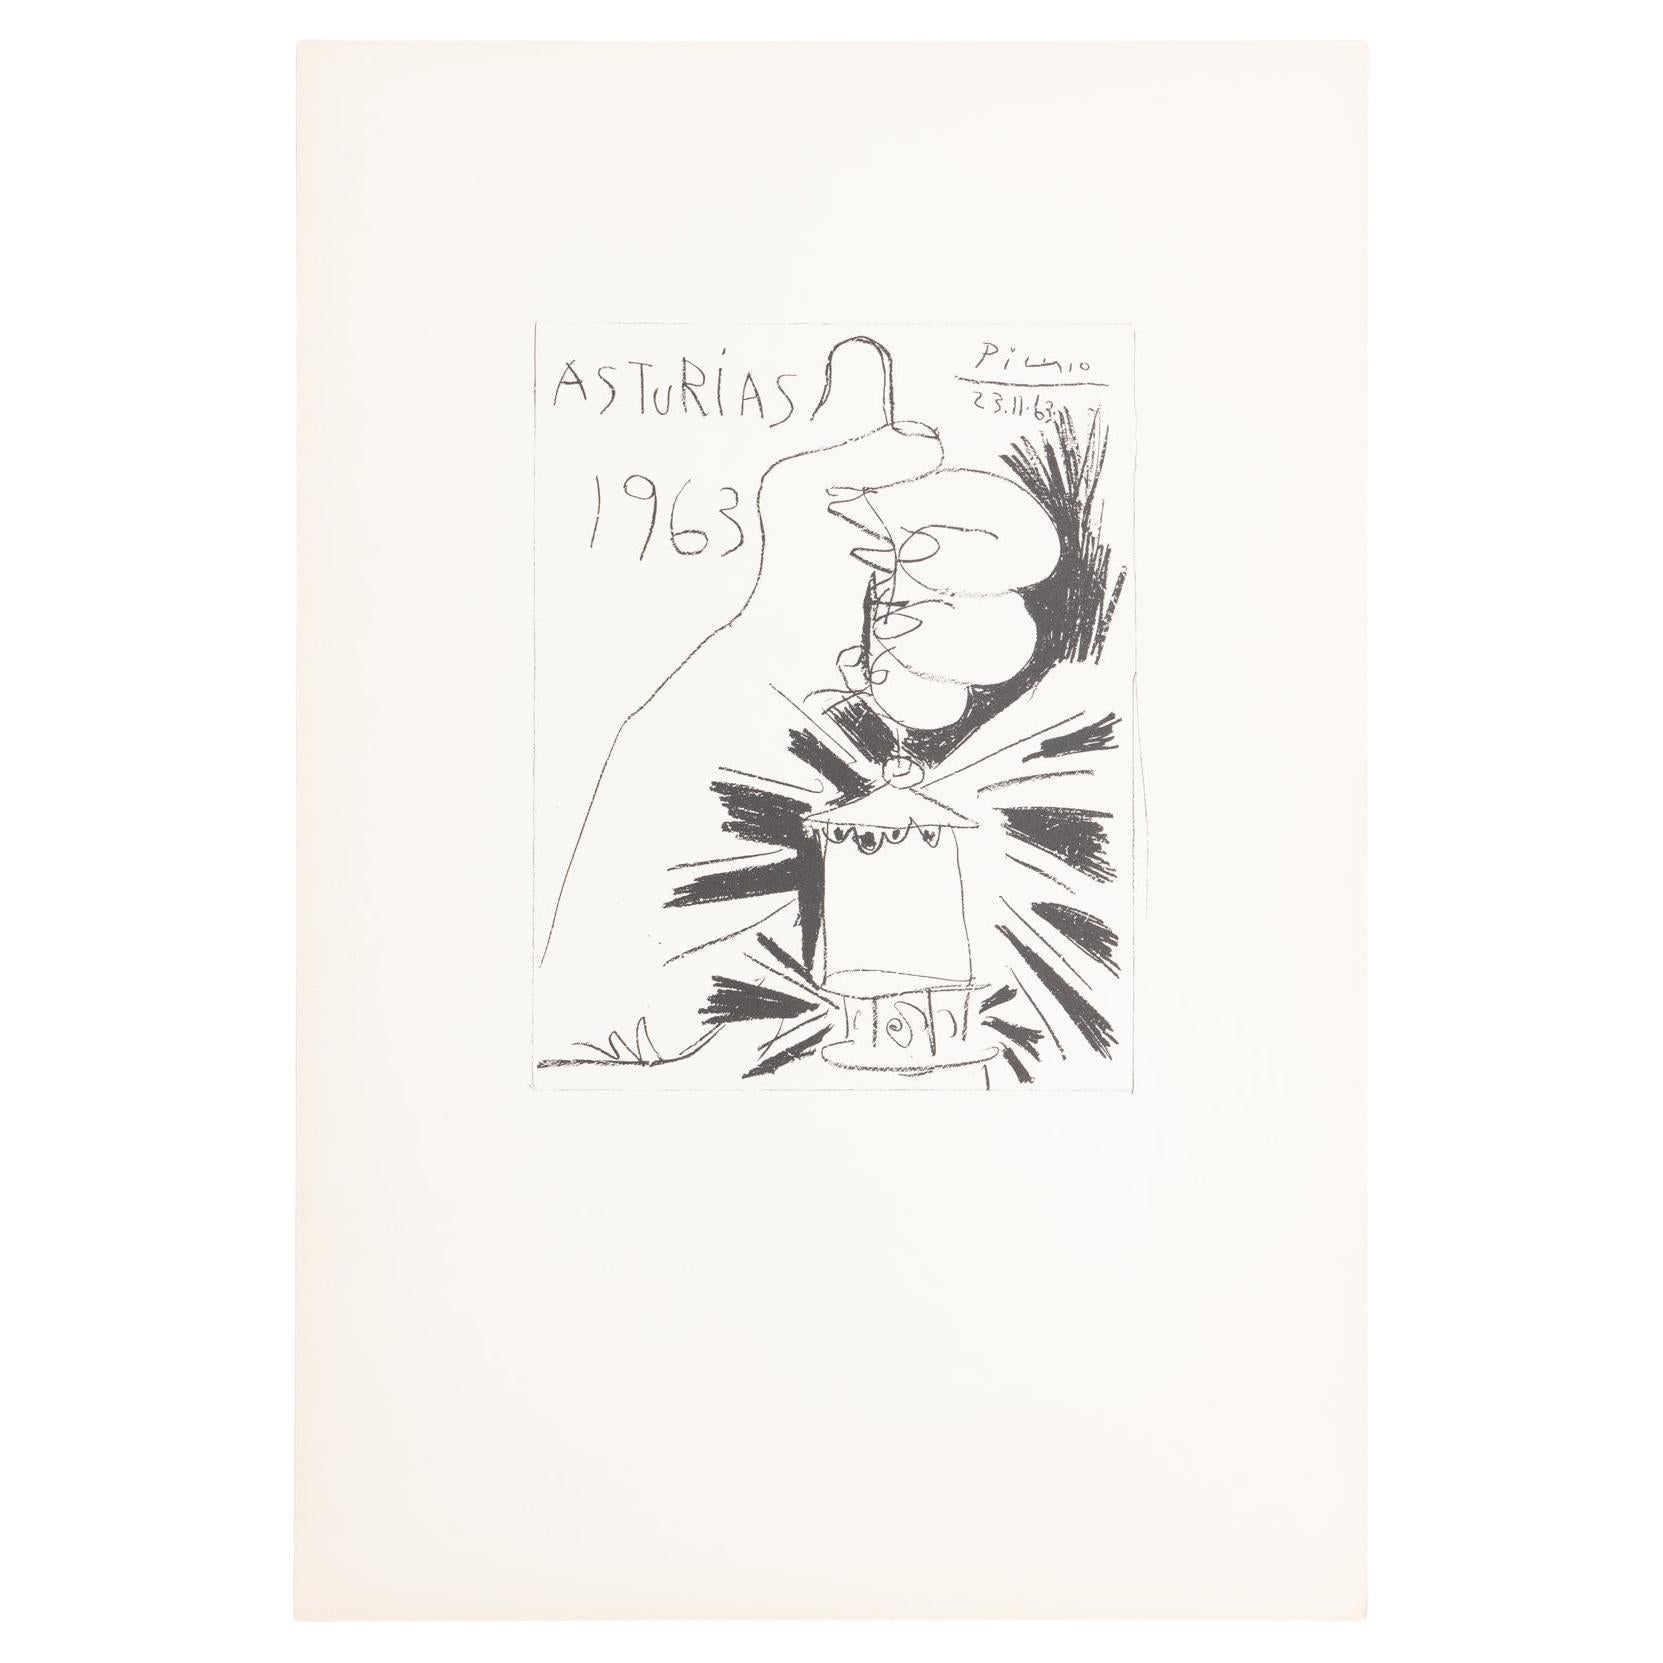 Original lithograph 'Asturias' by Pablo Picasso, 1963.

Signed in stone.

In good original condition.

Pablo Picasso (1881–1973), was a Spanish painter, sculptor, printmaker, ceramicist, stage designer, poet and playwright who spent most of